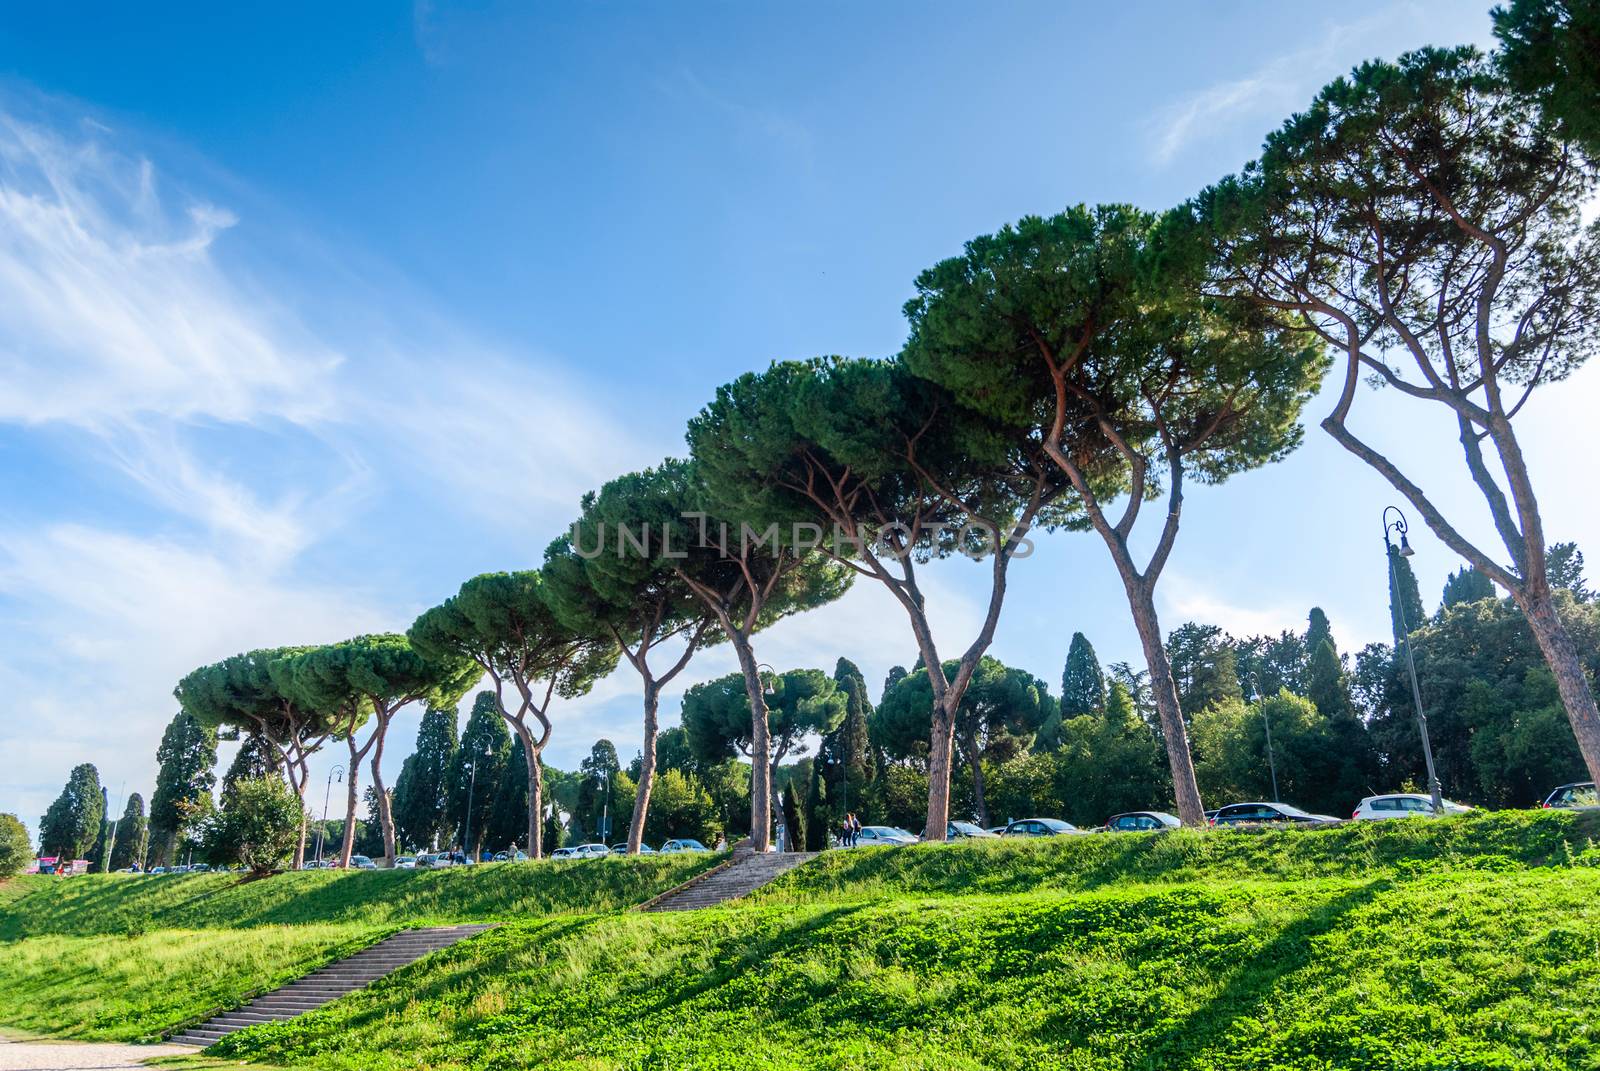 Italian Stone Pines Pinus Pinea also known as Umbrella Pines and by Zhukow